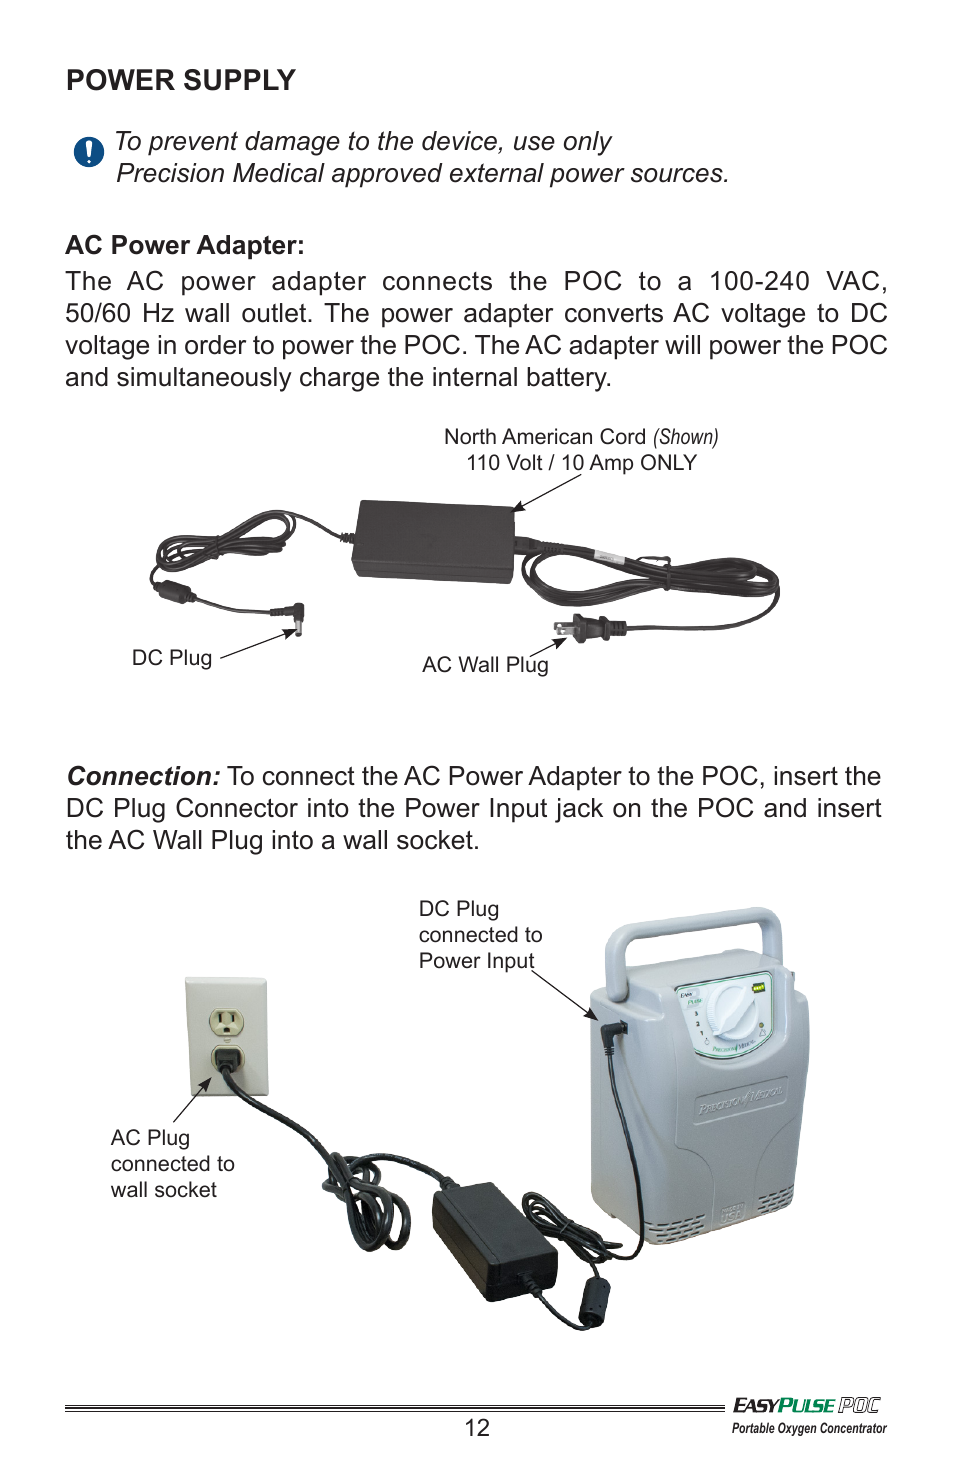 Power supply | Precision Medical PM4130 EasyPulse POC3 User Manual